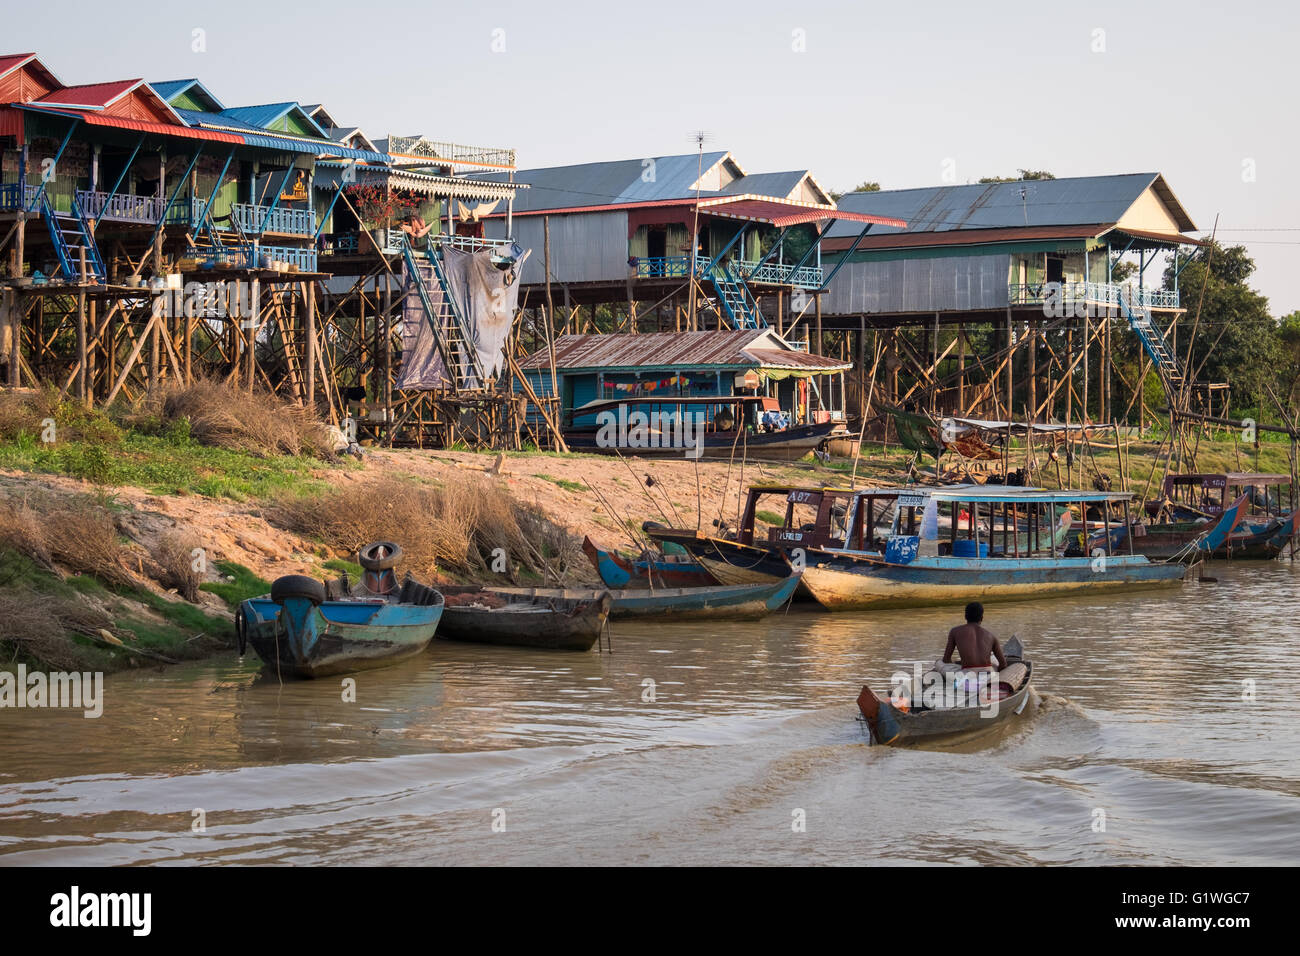 A view of Kampong Khleang in Cambodia Stock Photo